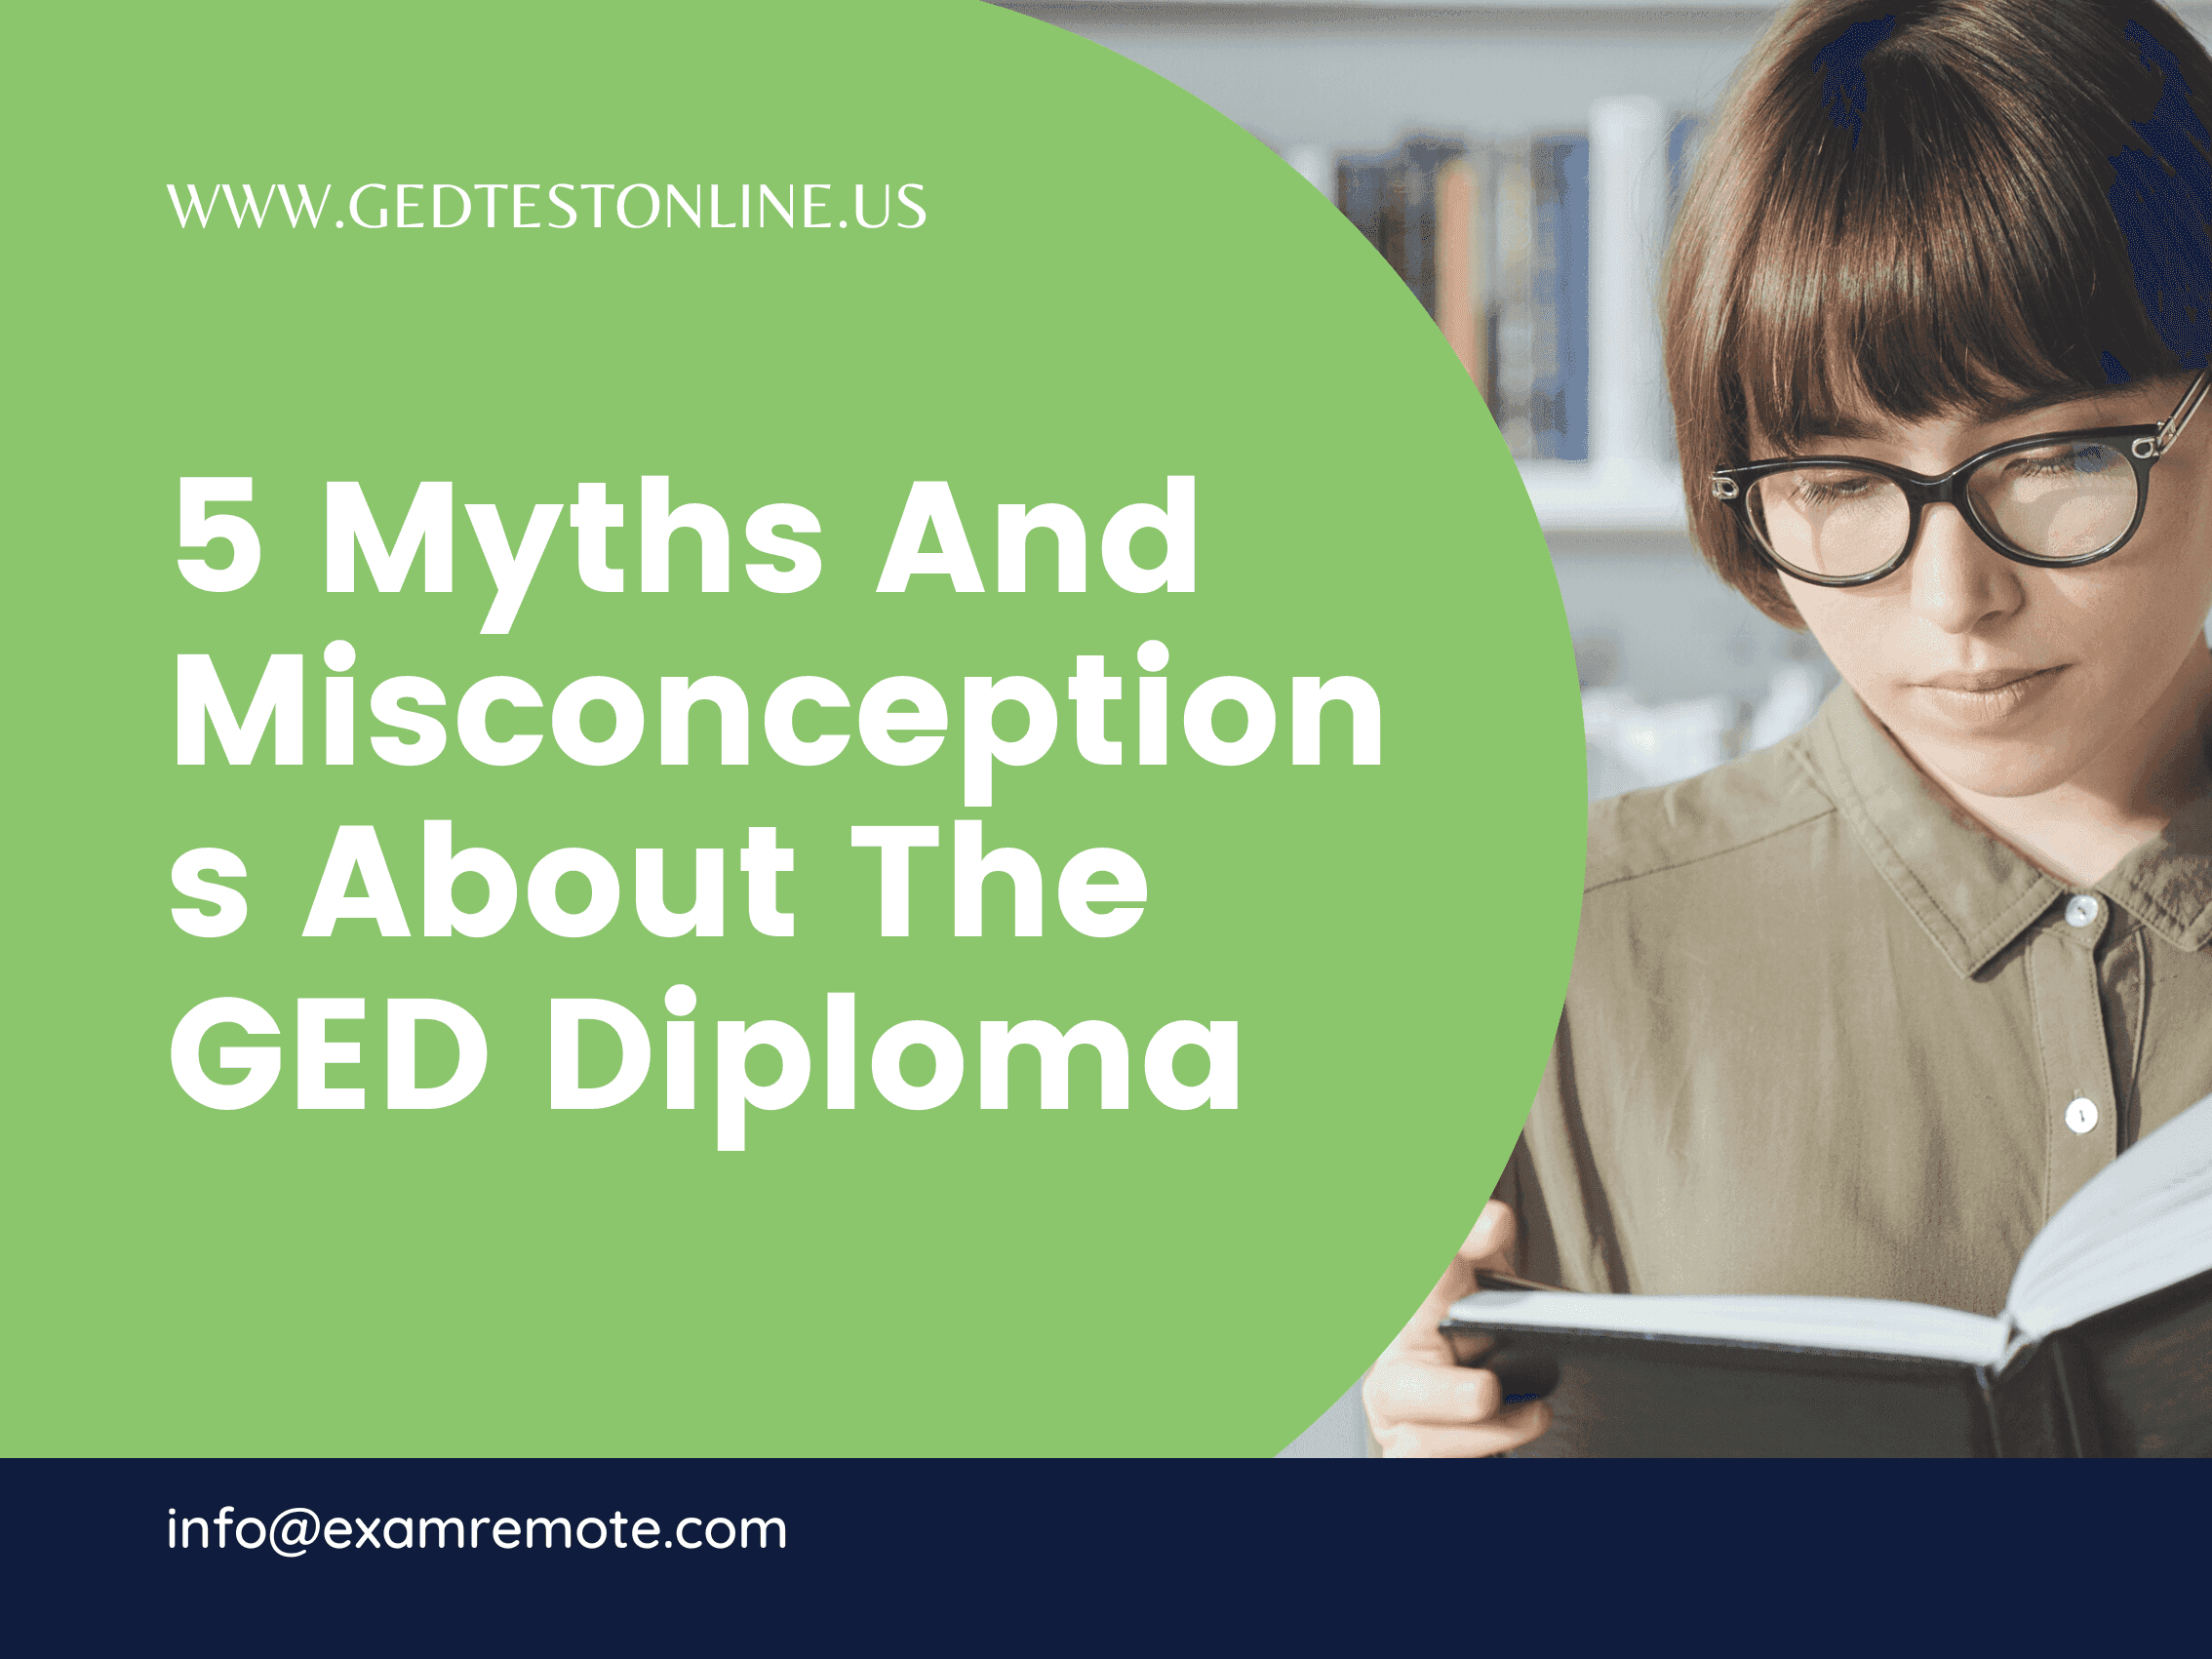 5 Myths and Misconceptions about the GED Diploma